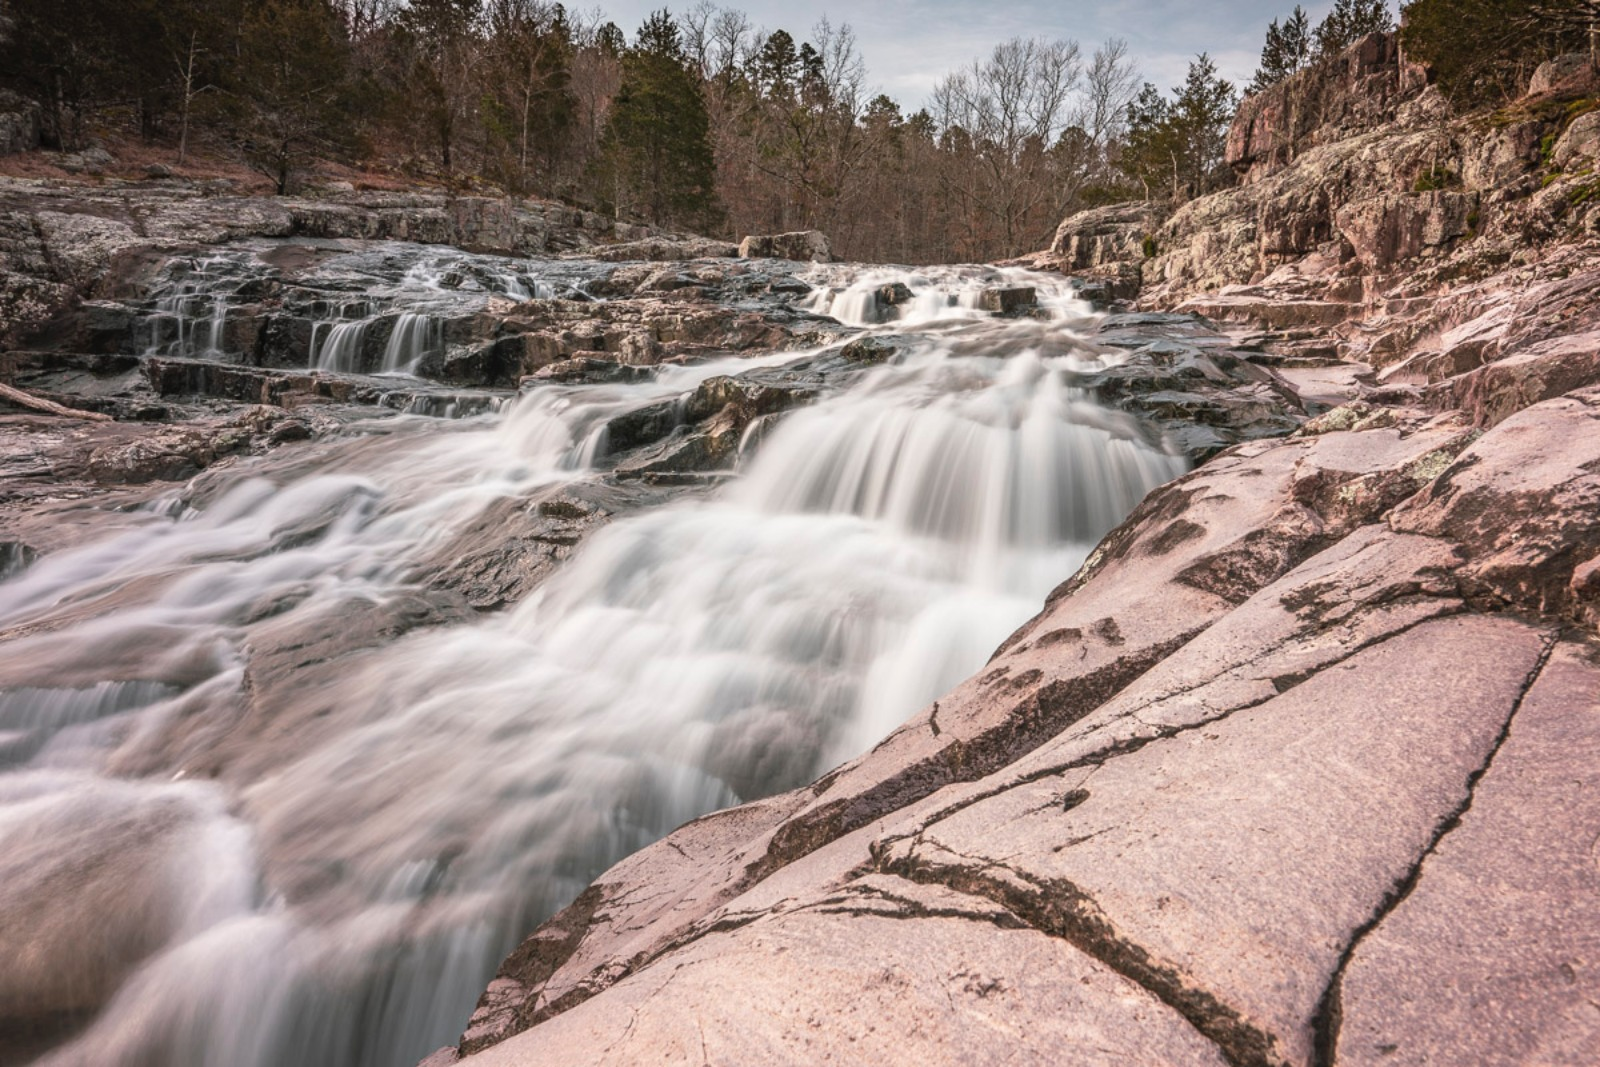 Rocky Falls near Eminence is easy to reach down a short path from the parking lot. (Photo by Sony Hocklander)